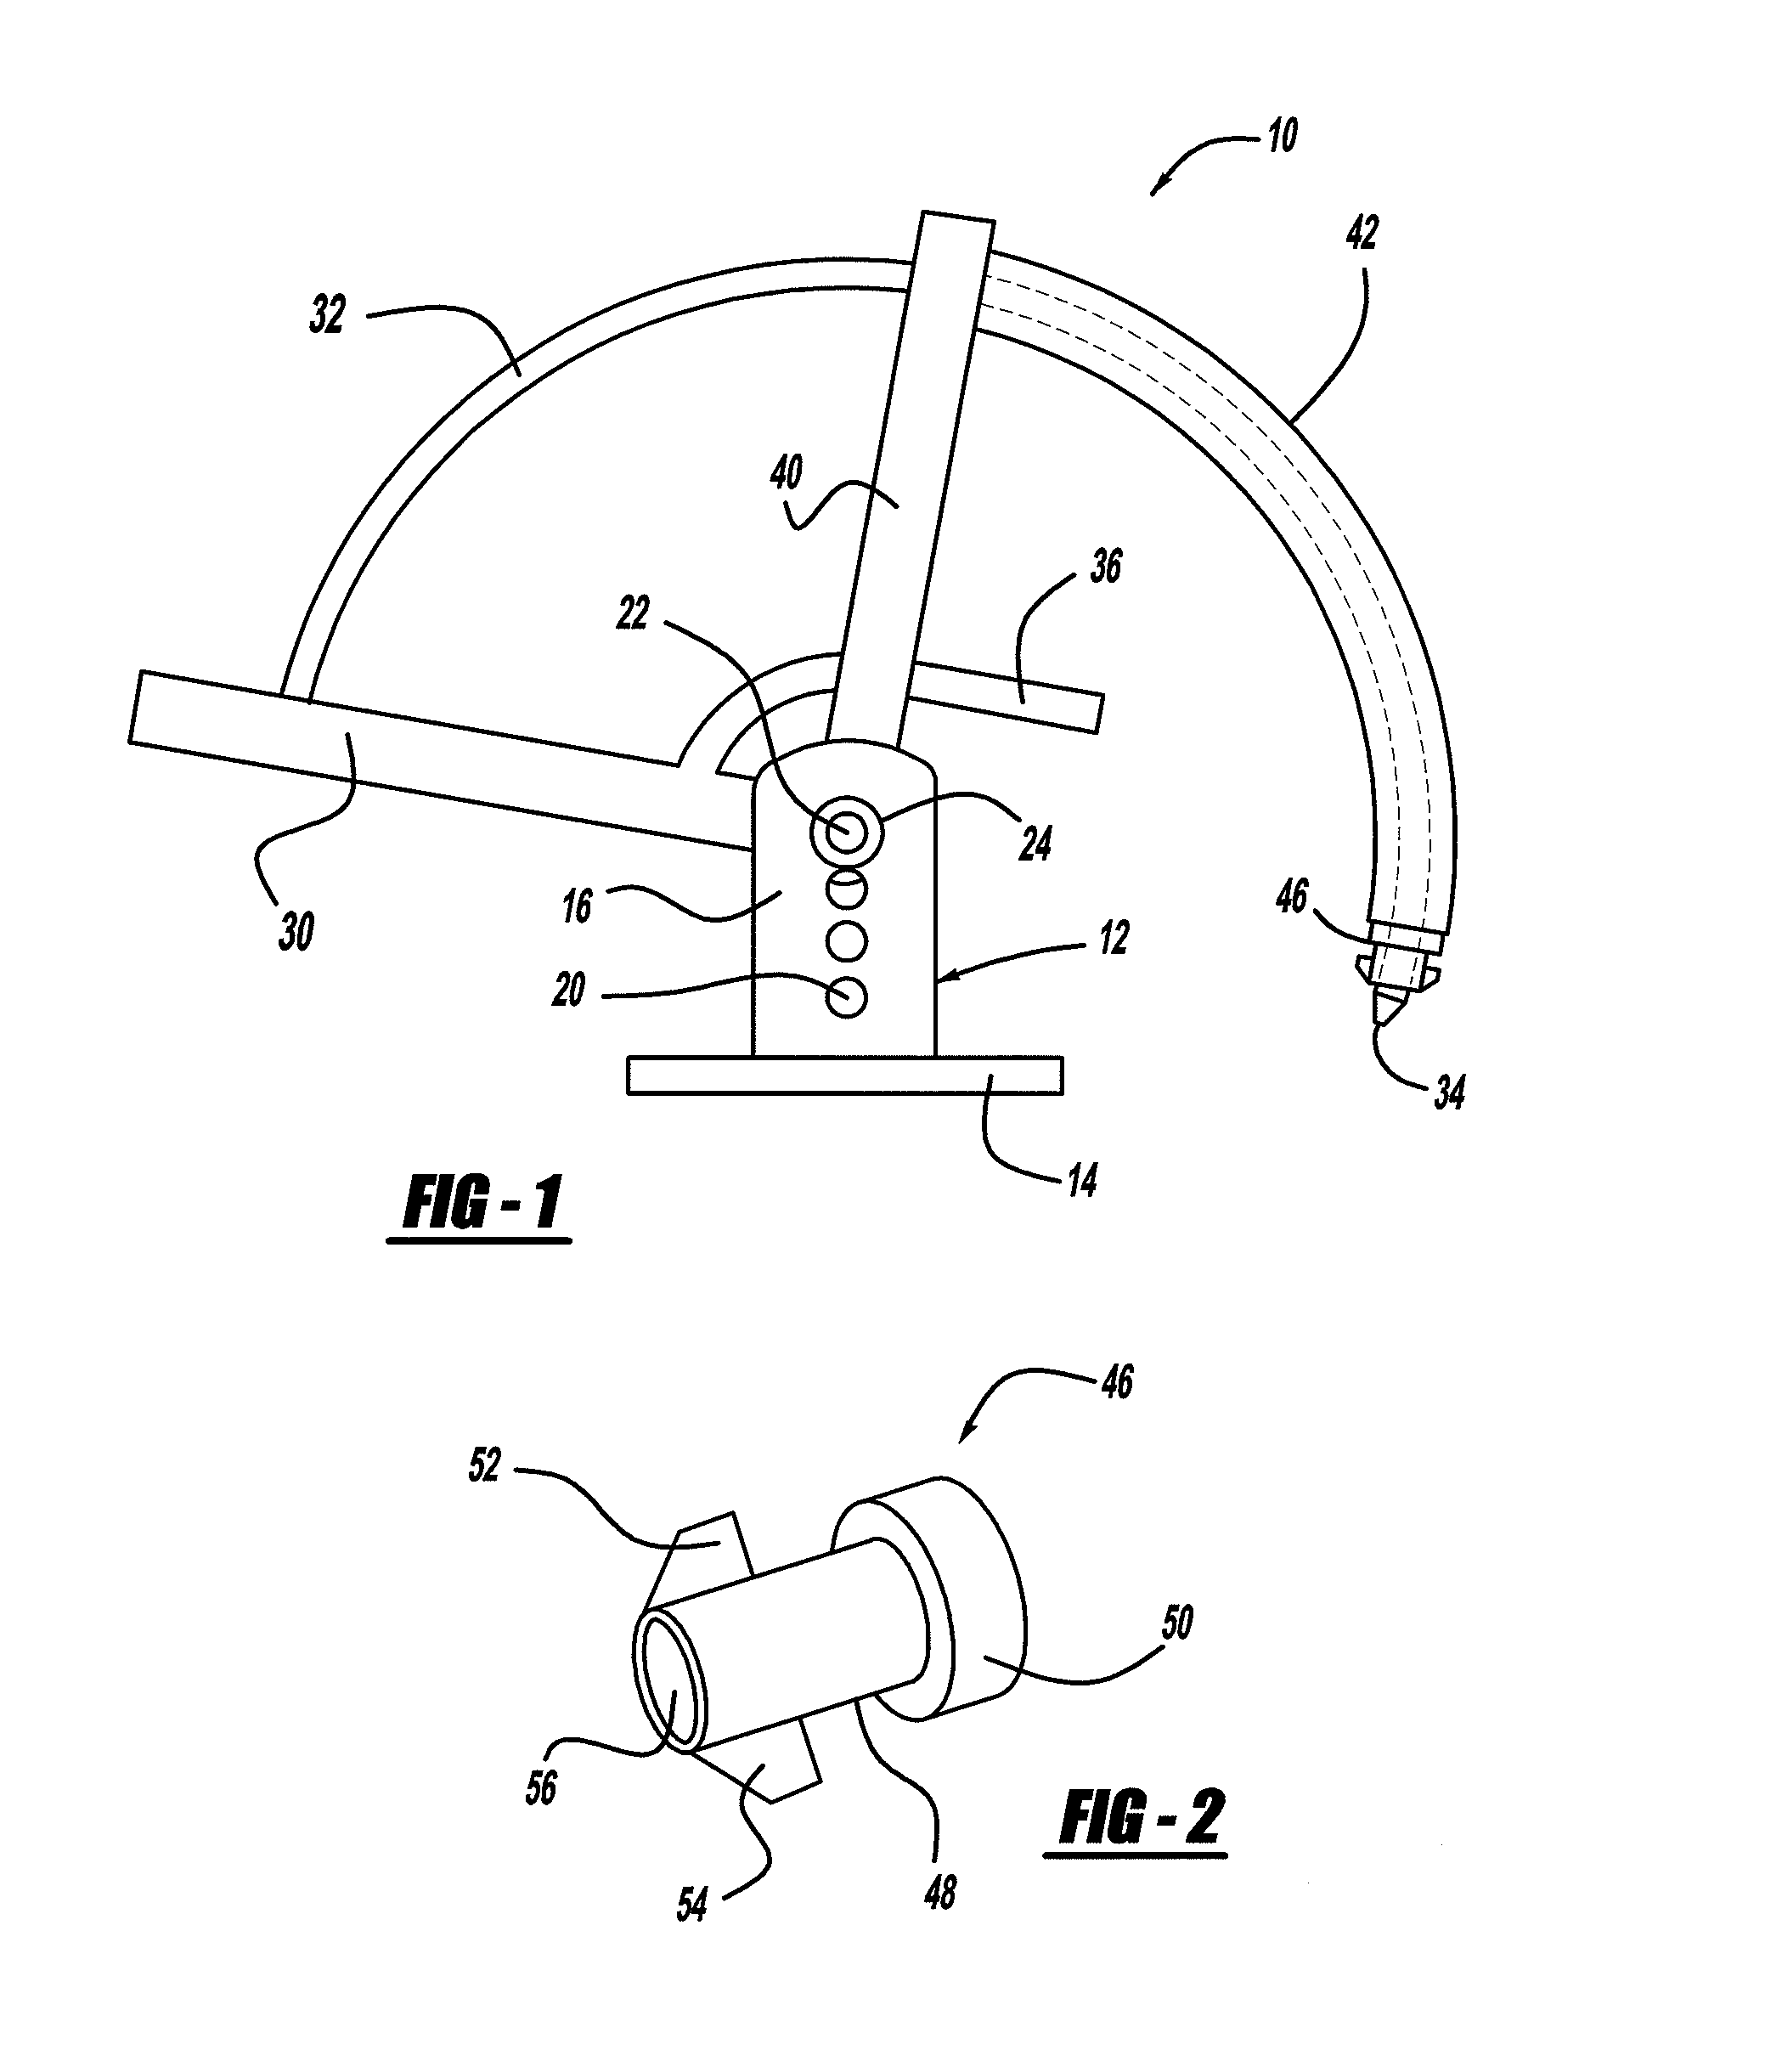 Interspinous Process Spacer Device